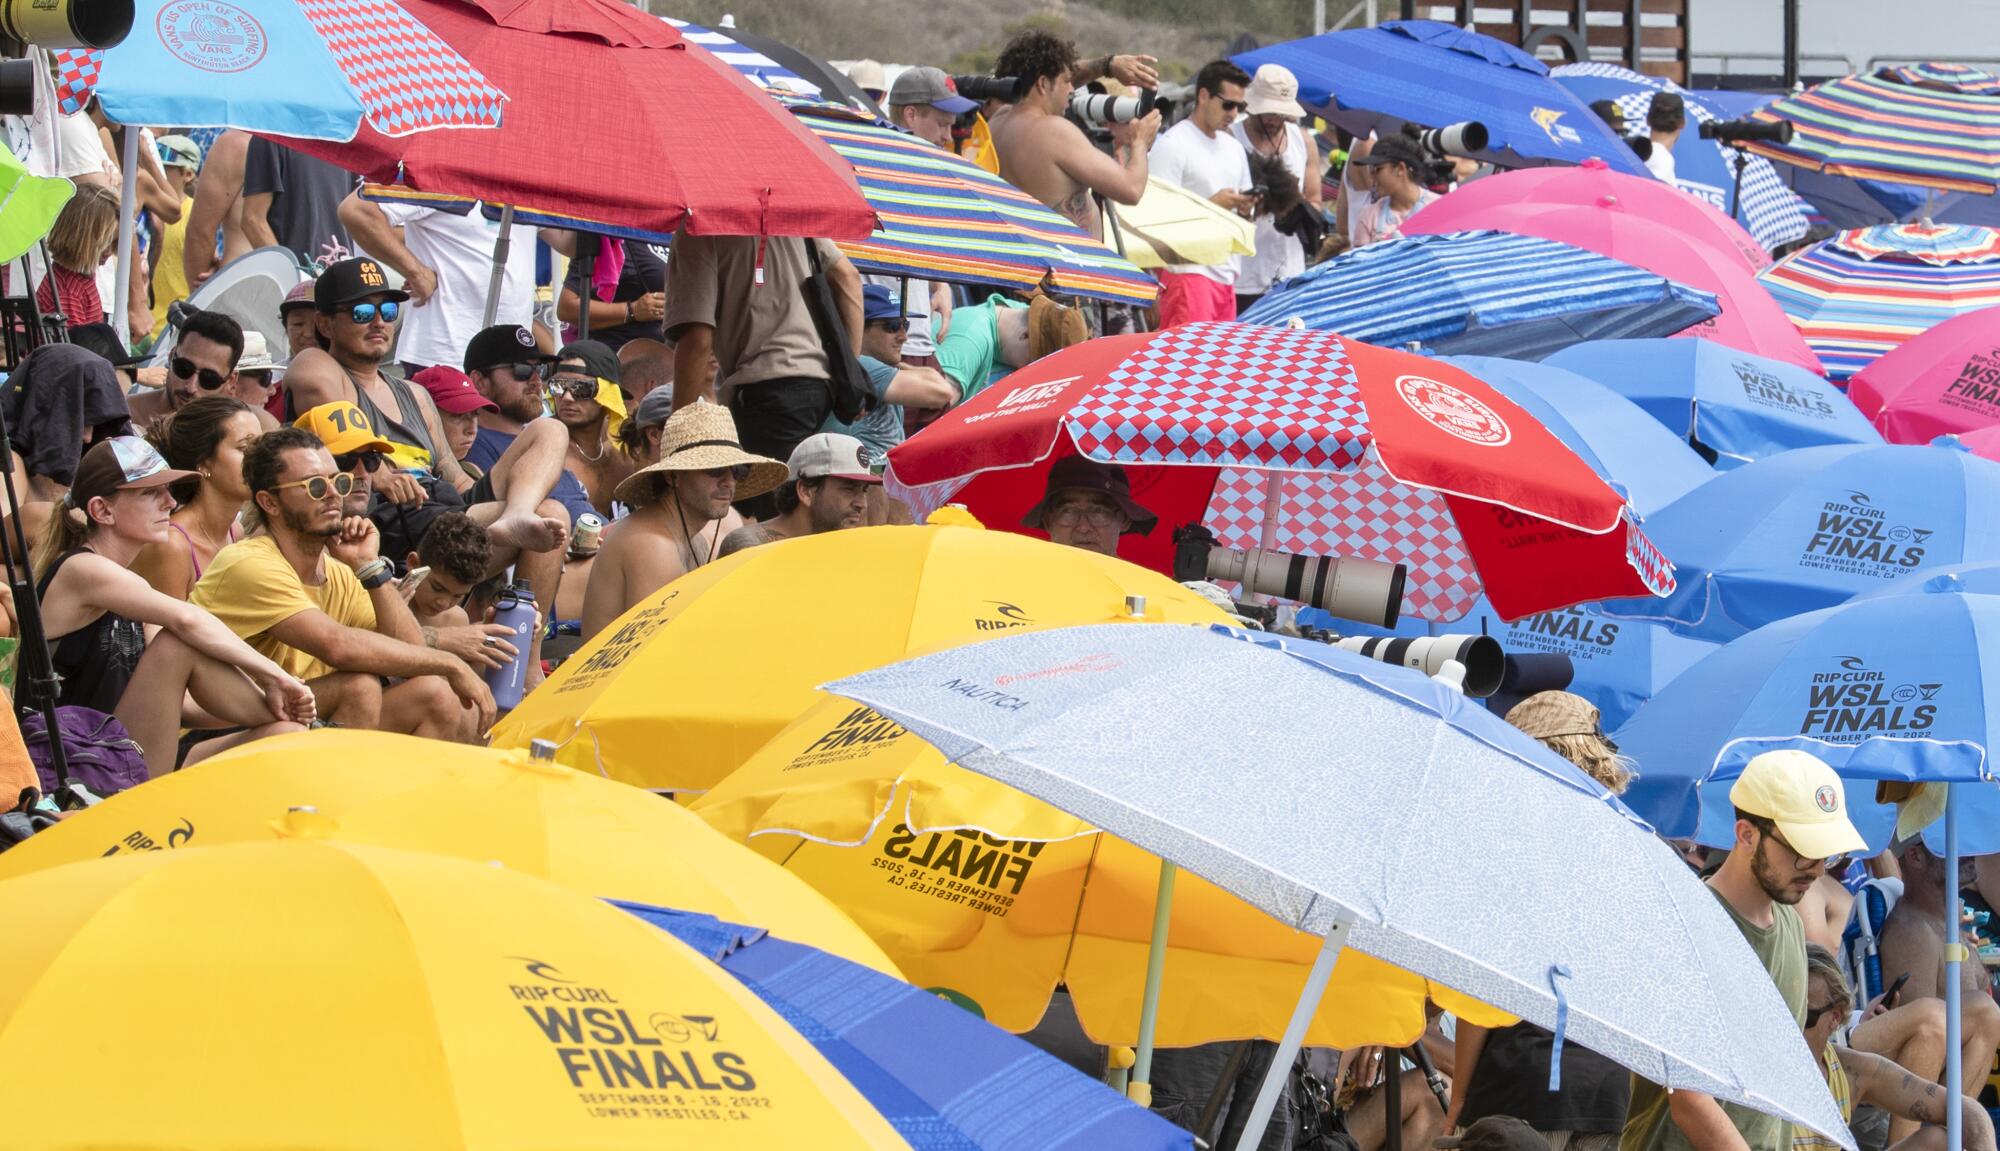 Hundreds of fans line the cobble-stone-lined beach to watch the Rip Curl WSL Finals at Lower Trestles.